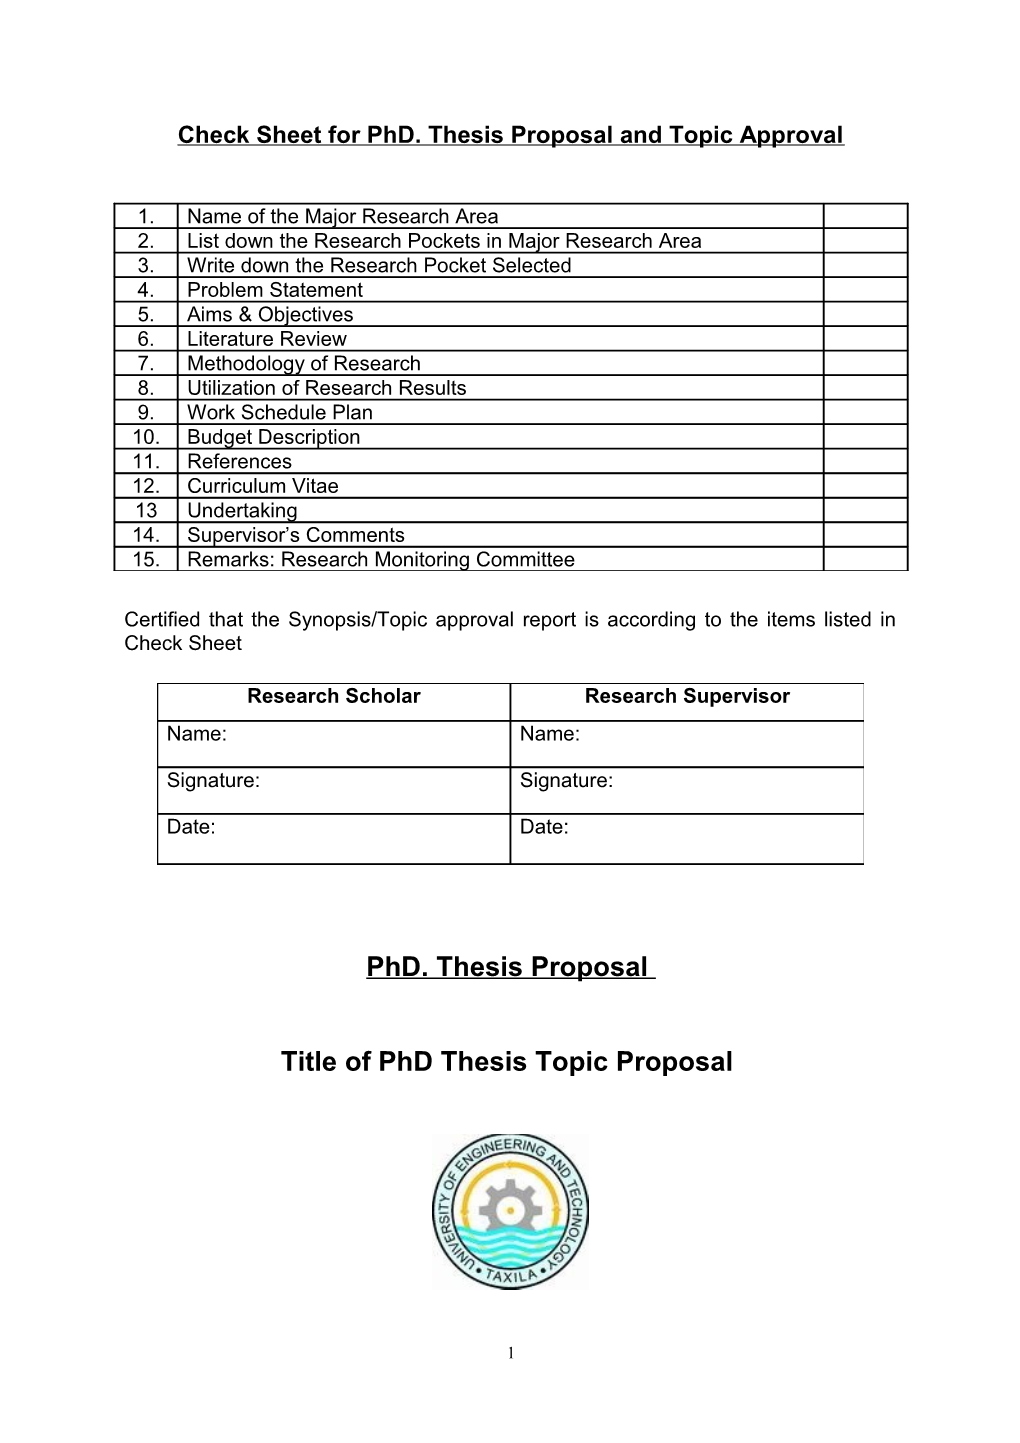 Check Sheet for Phd. Thesis Proposal and Topic Approval